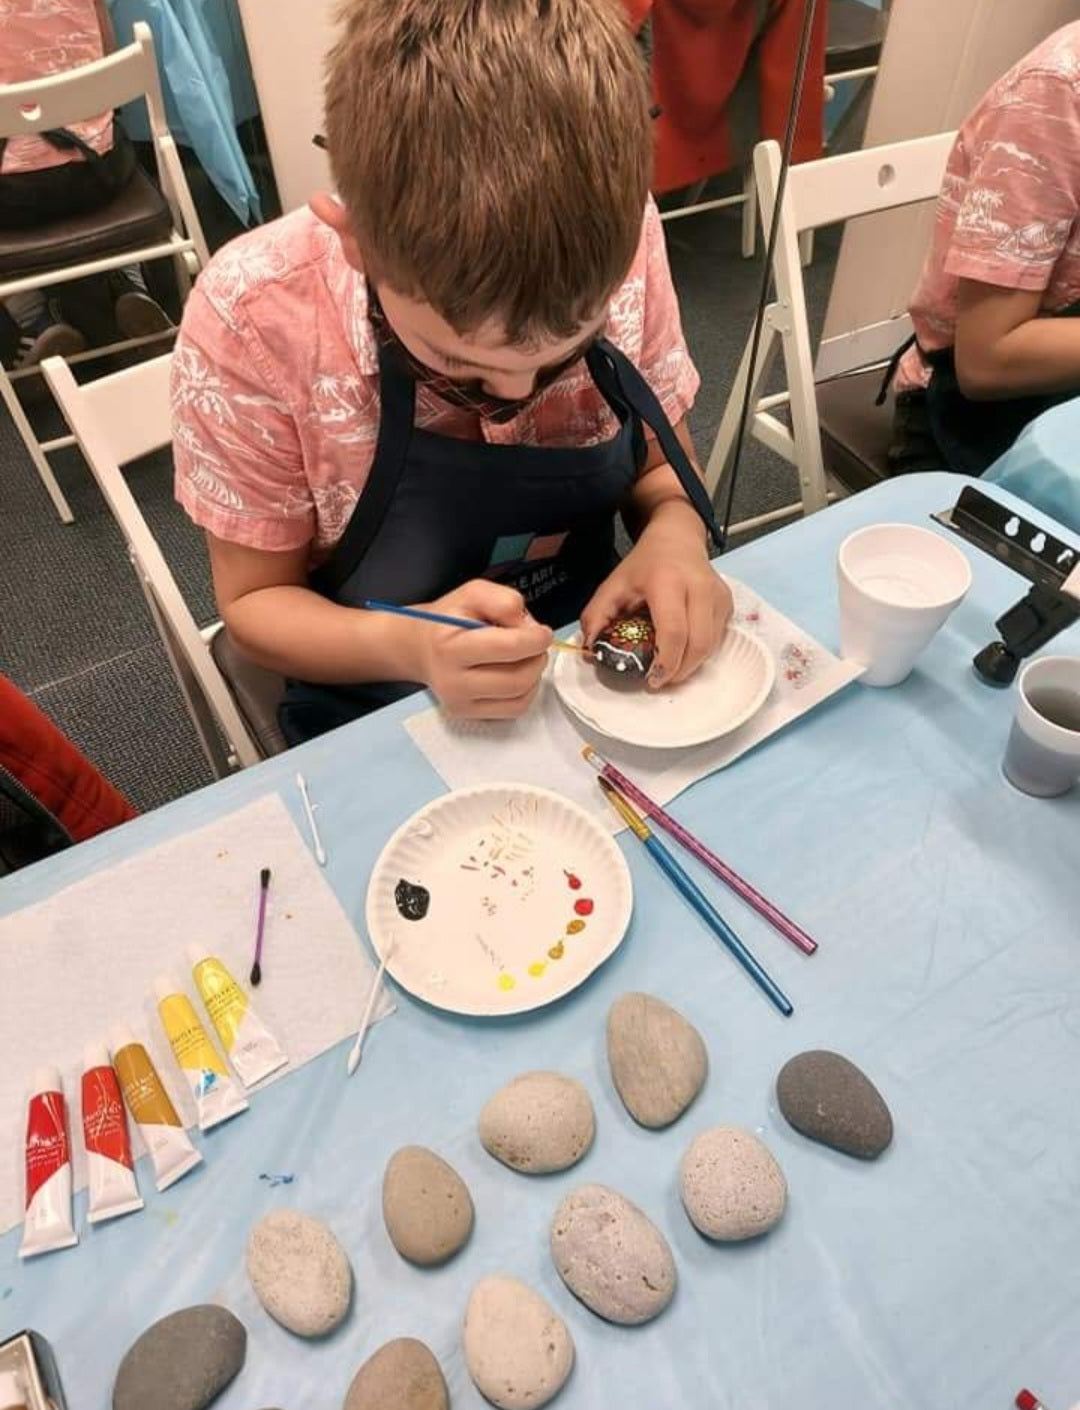 Applied Art classes by Alesia Chaika Art & Style Academy in Buffalo Grove, IL Chicago Art Classes for children, kids and adults